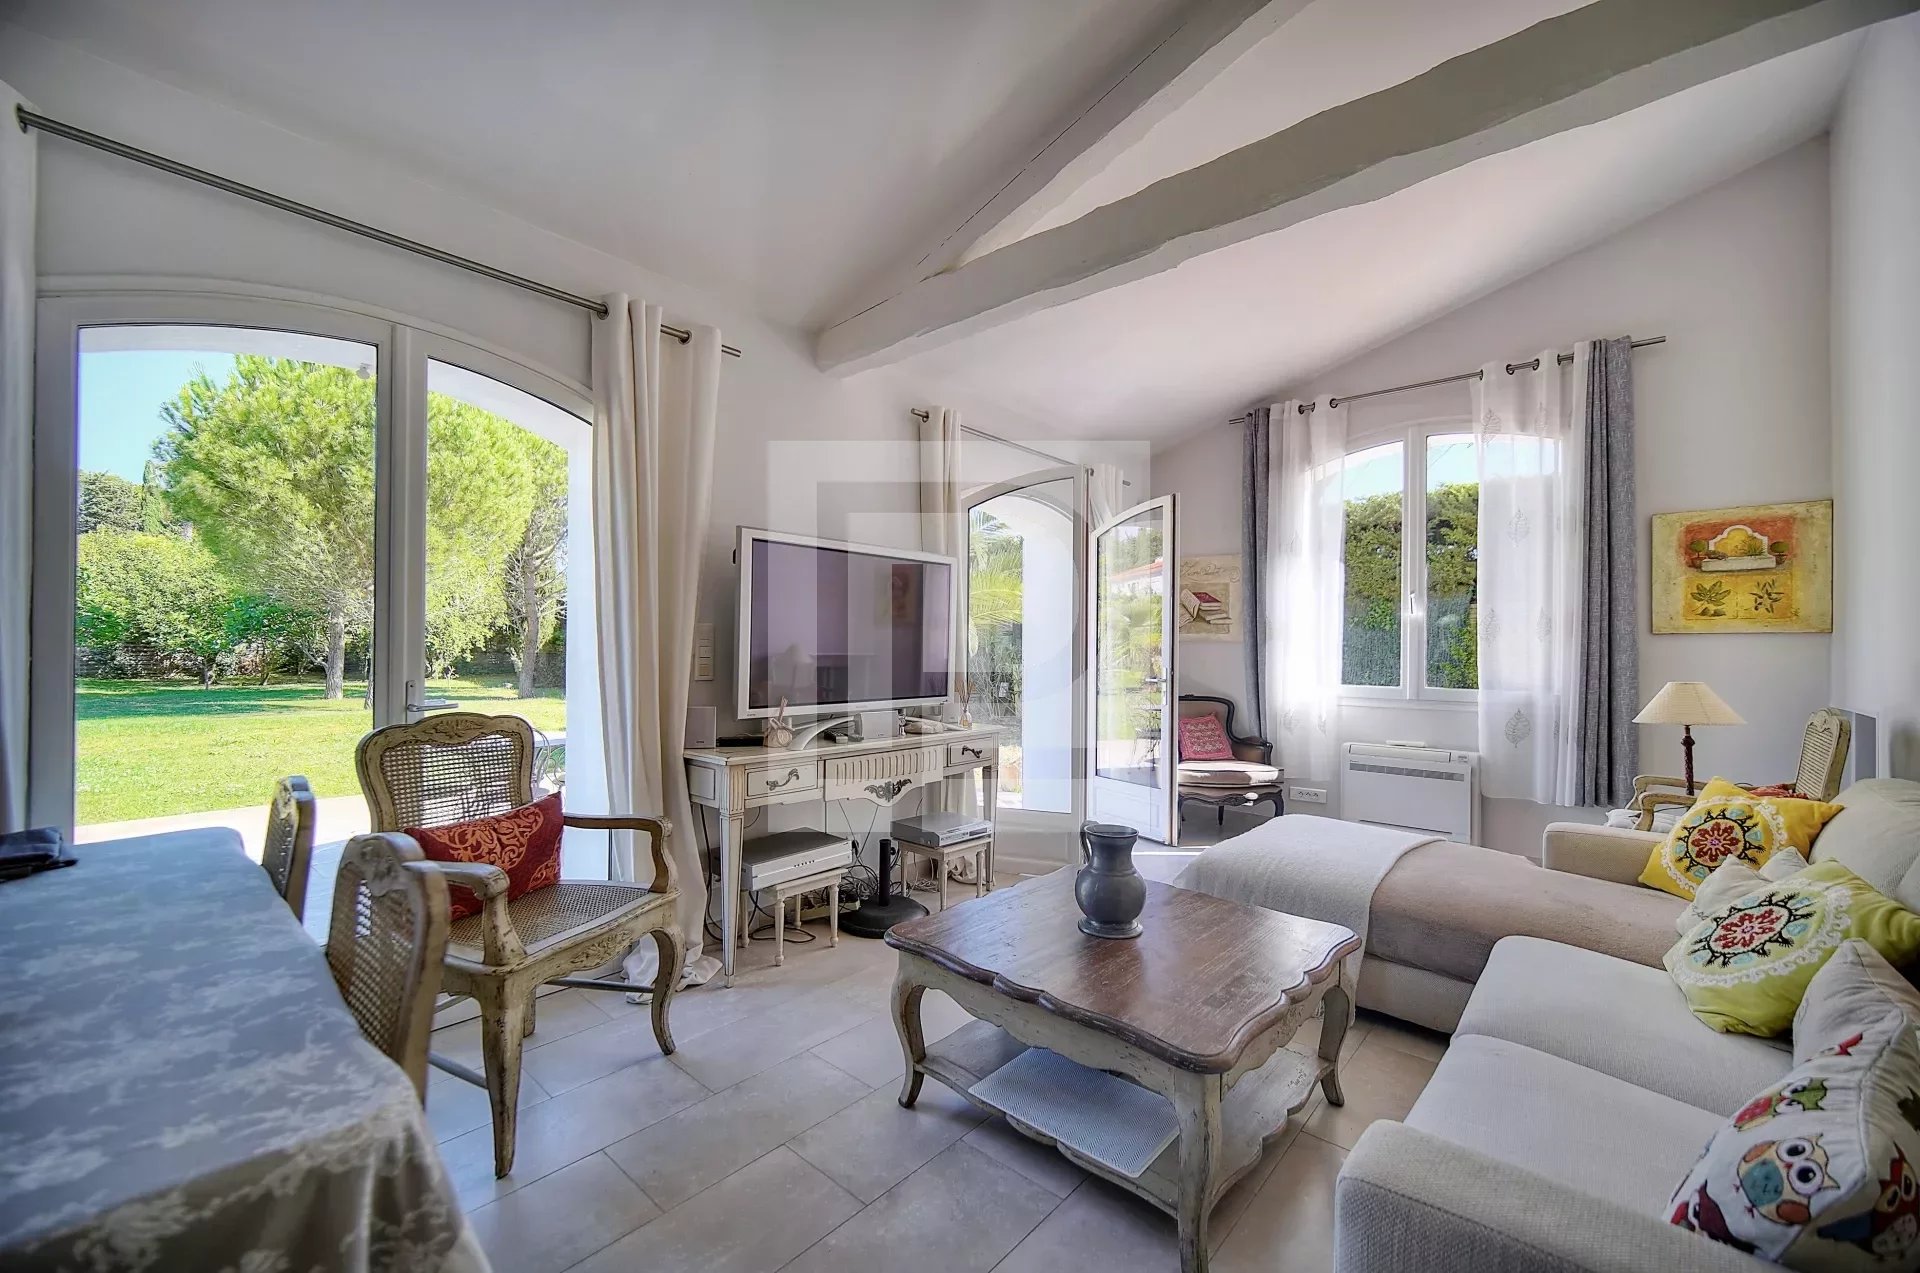 Magnificent property in the heart of one of the most sought-after areas of Mougins